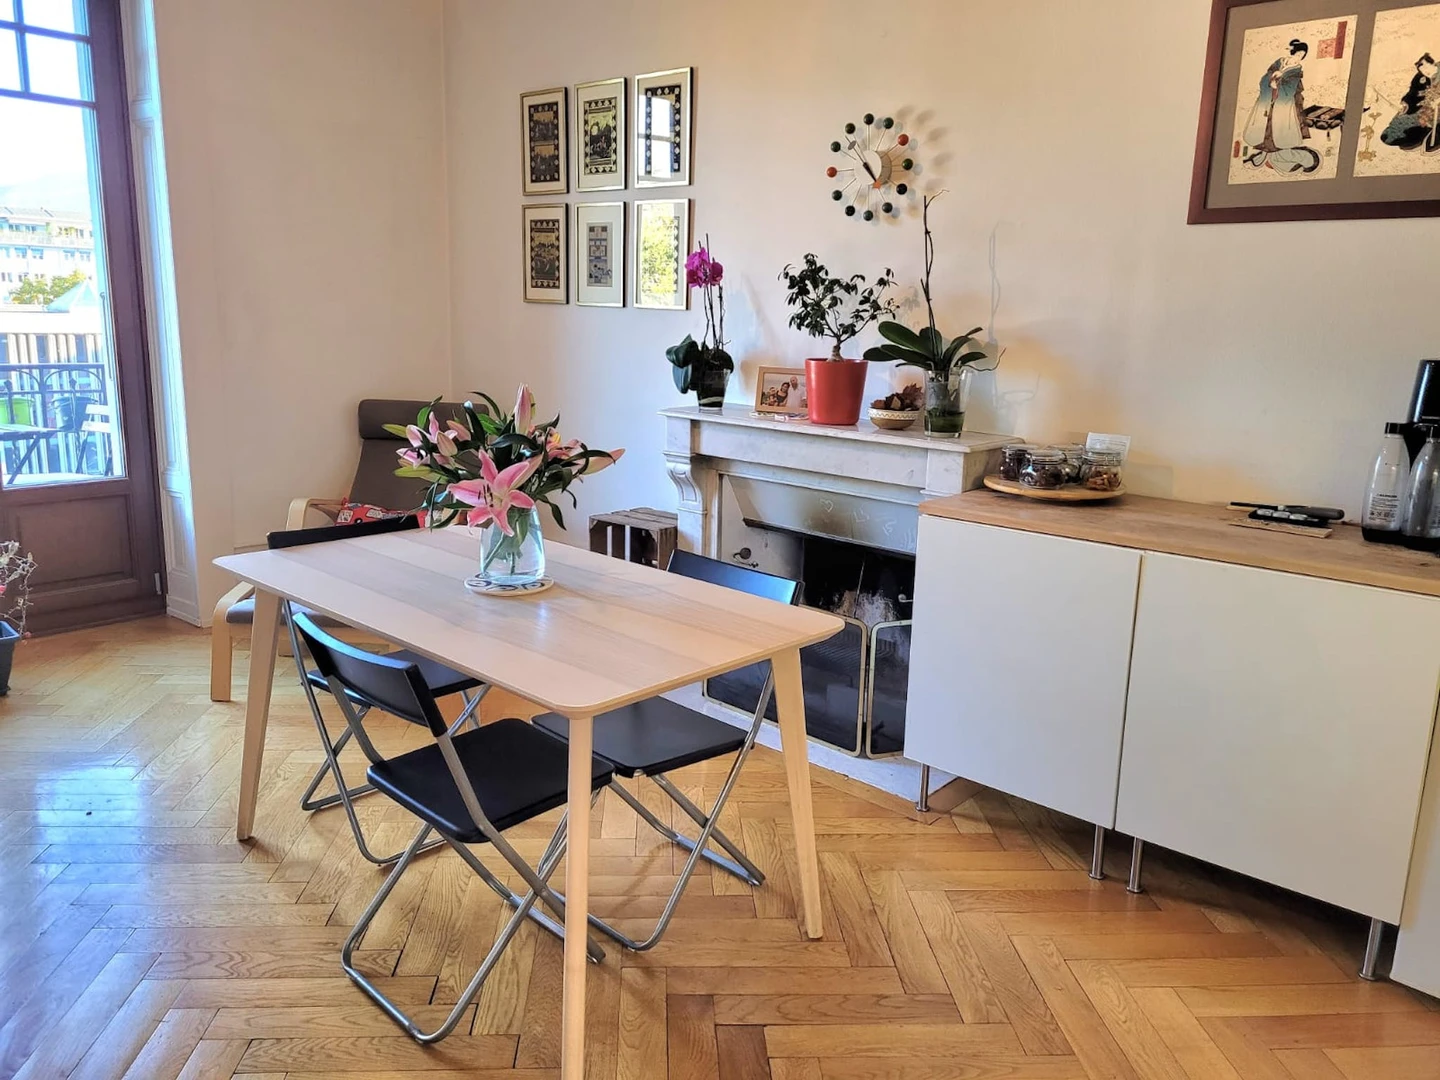 Room for rent in a shared flat in geneva